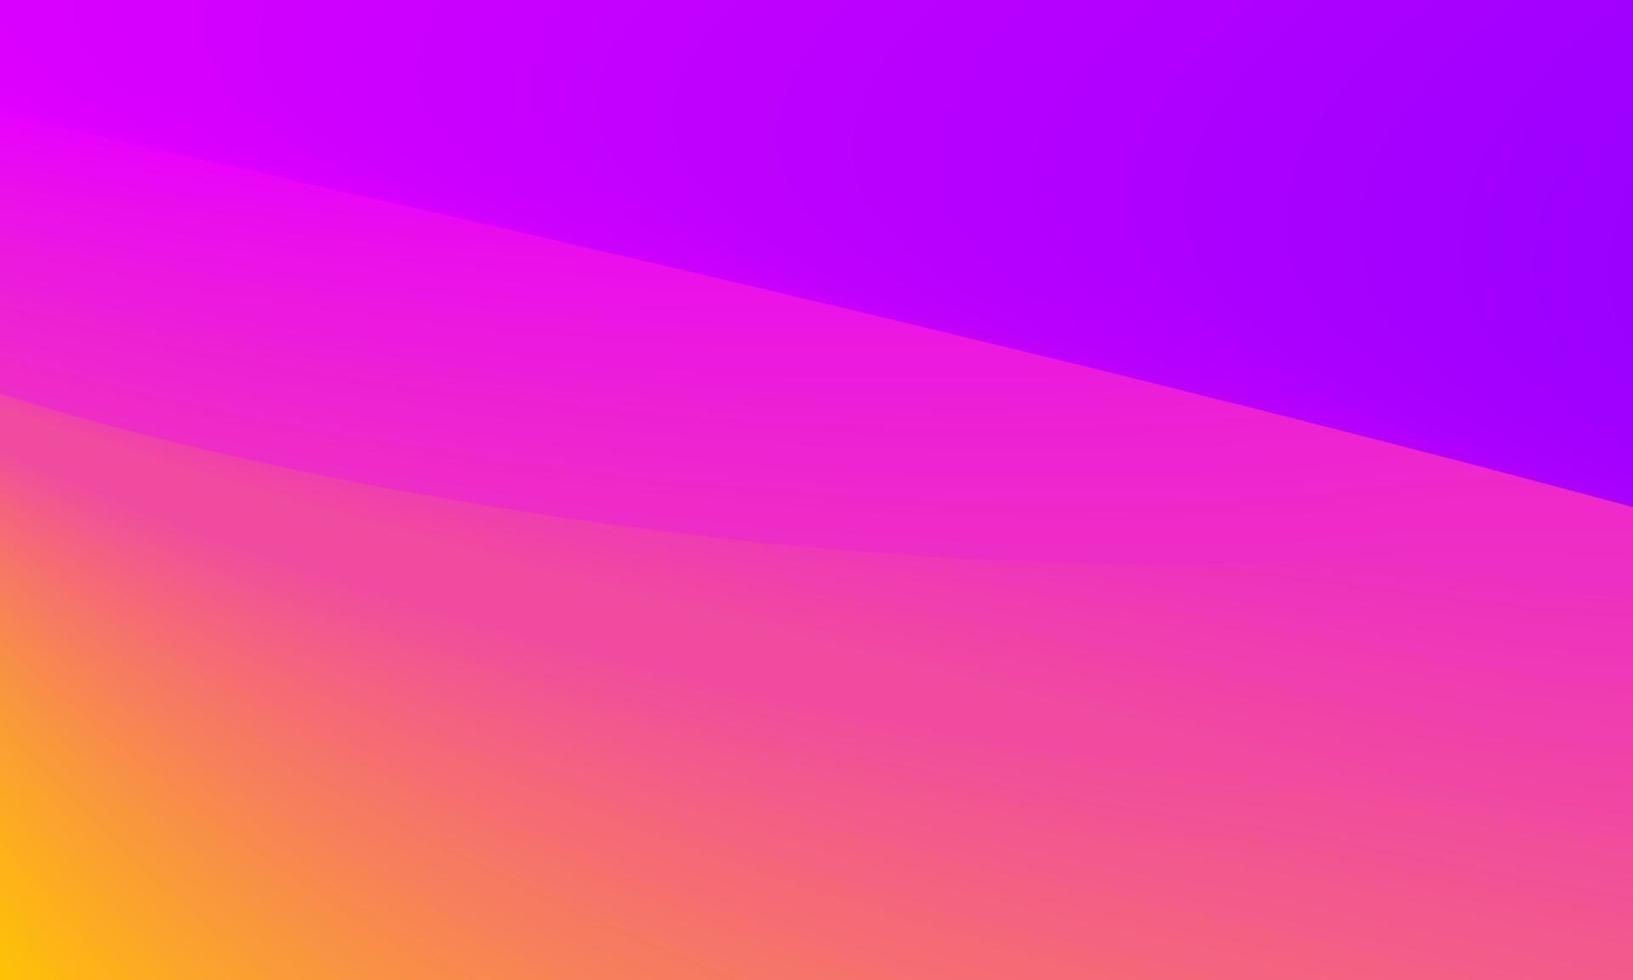 beautiful colorful gradient background. combination of bright colors. soft and smooth texture. used for background vector